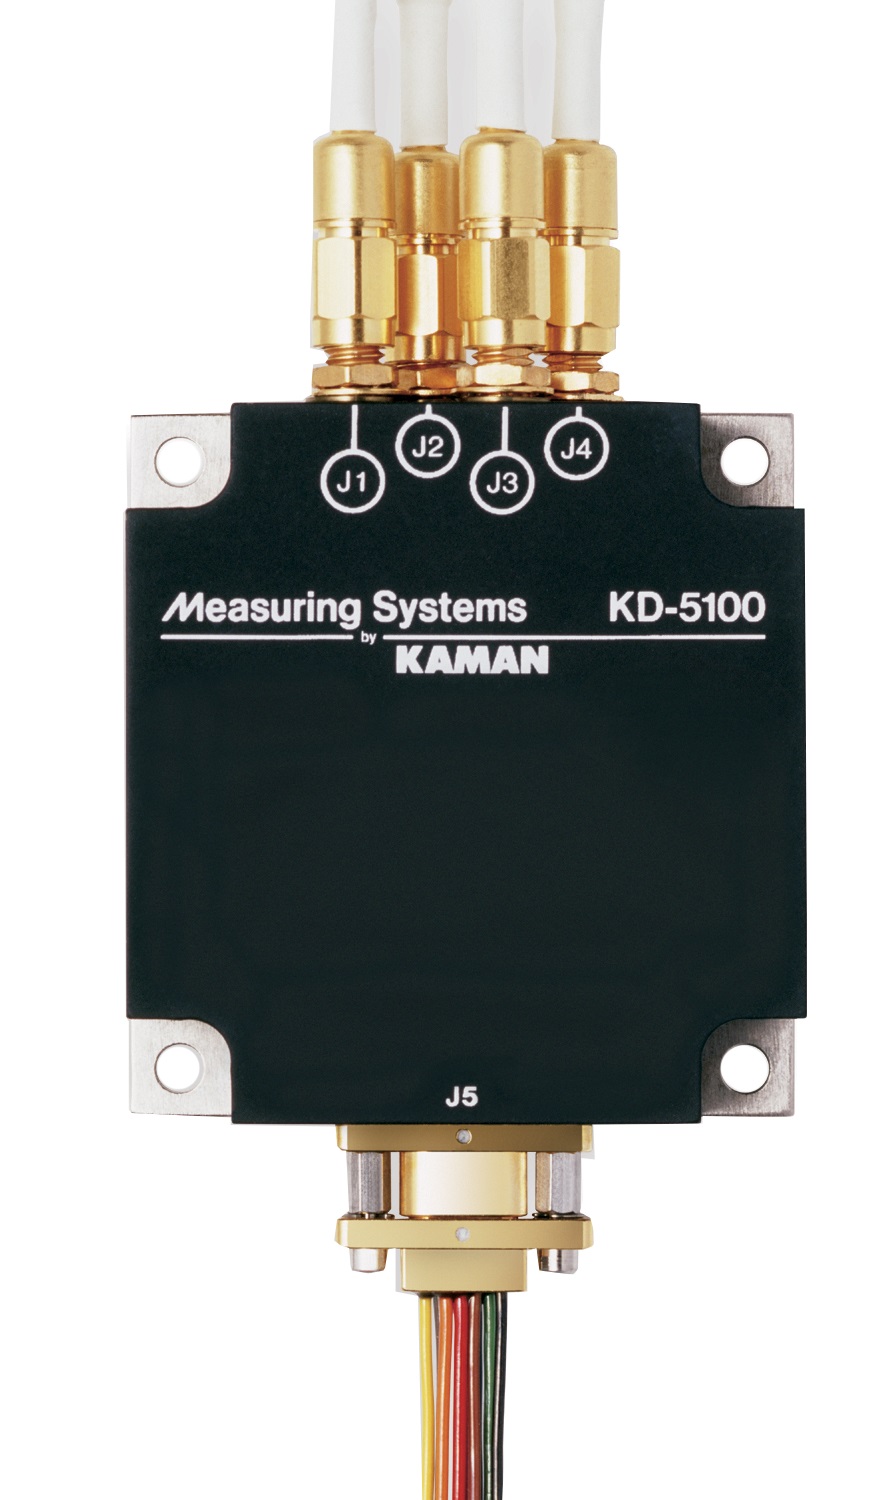 Measuring Division of Kaman Precision Products unveils its KD-5100 differential measurement system